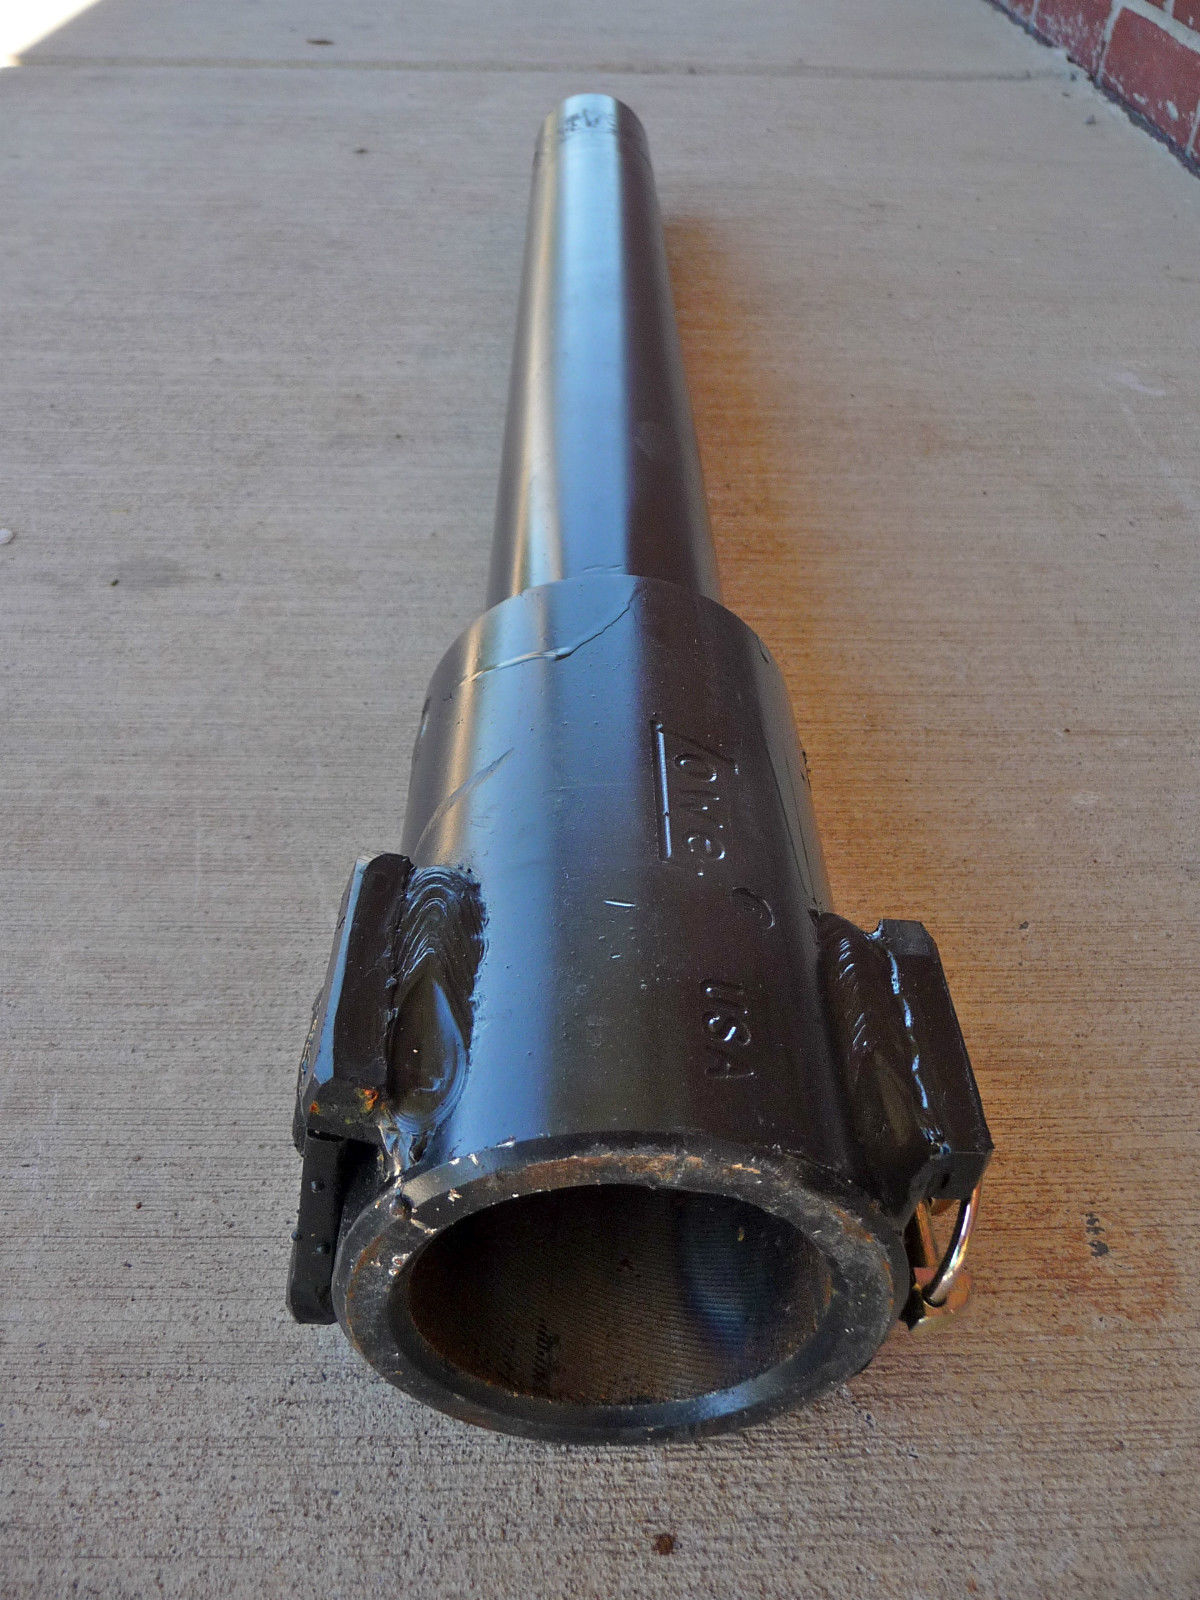 Lowe Auger Post Hole Shaft Extension 24" Round 2-9/16" Diameter Ship $49 